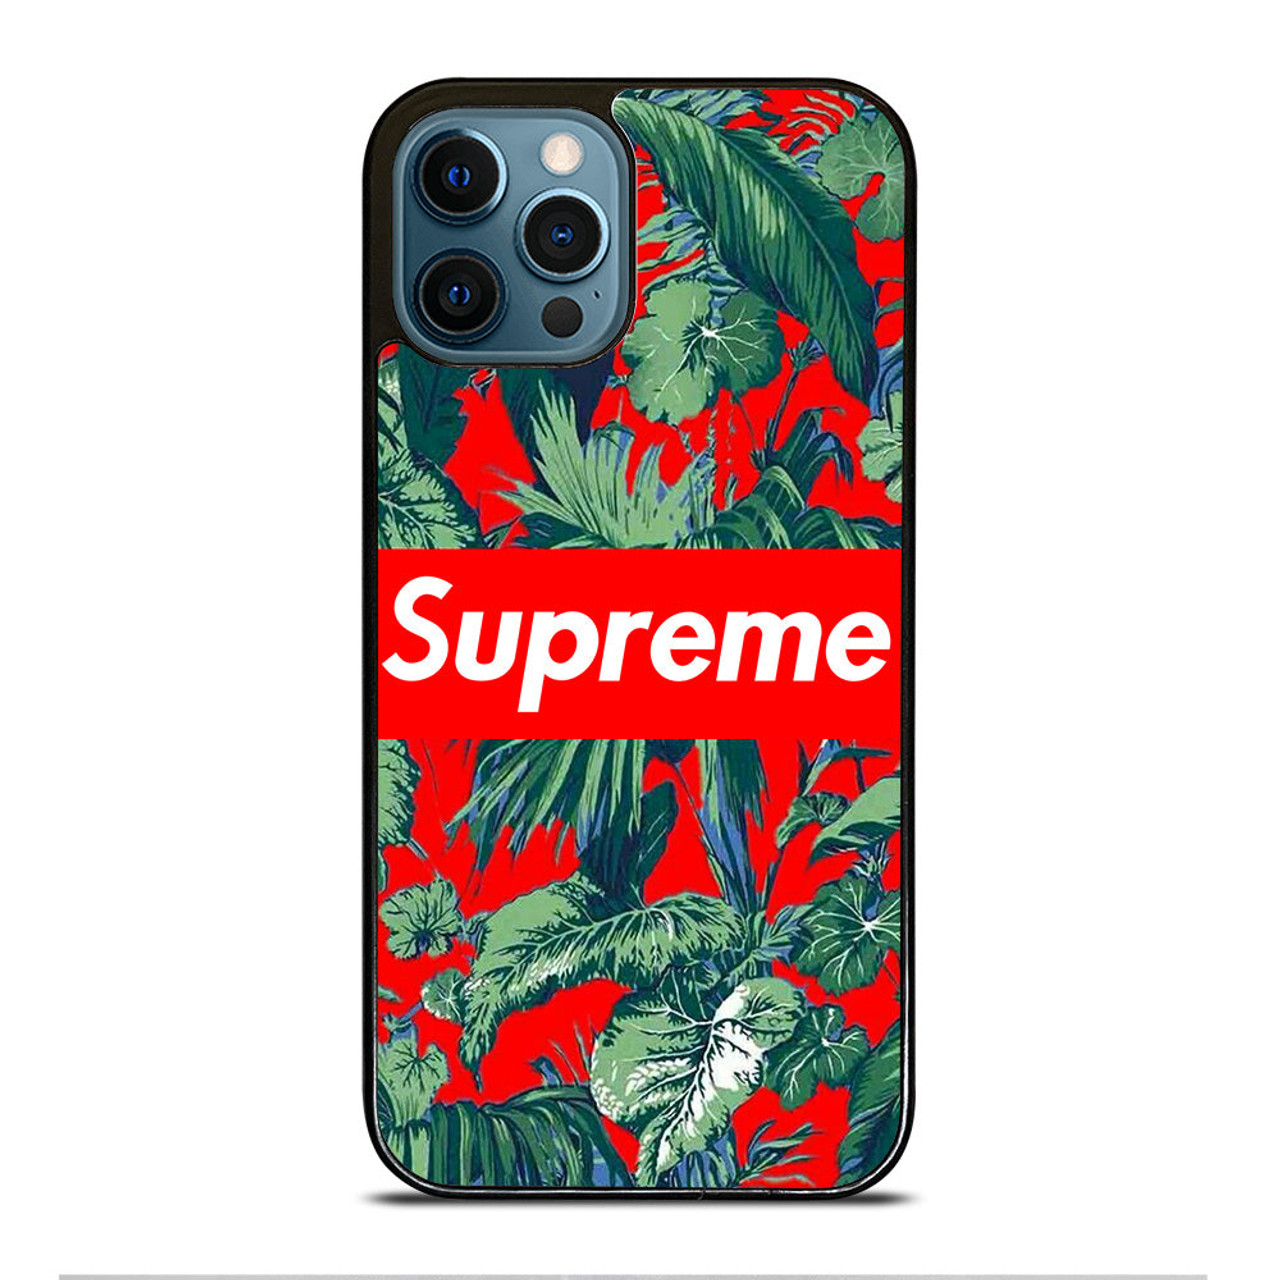 Supreme Floral Iphone 12 Pro Max Case Cover